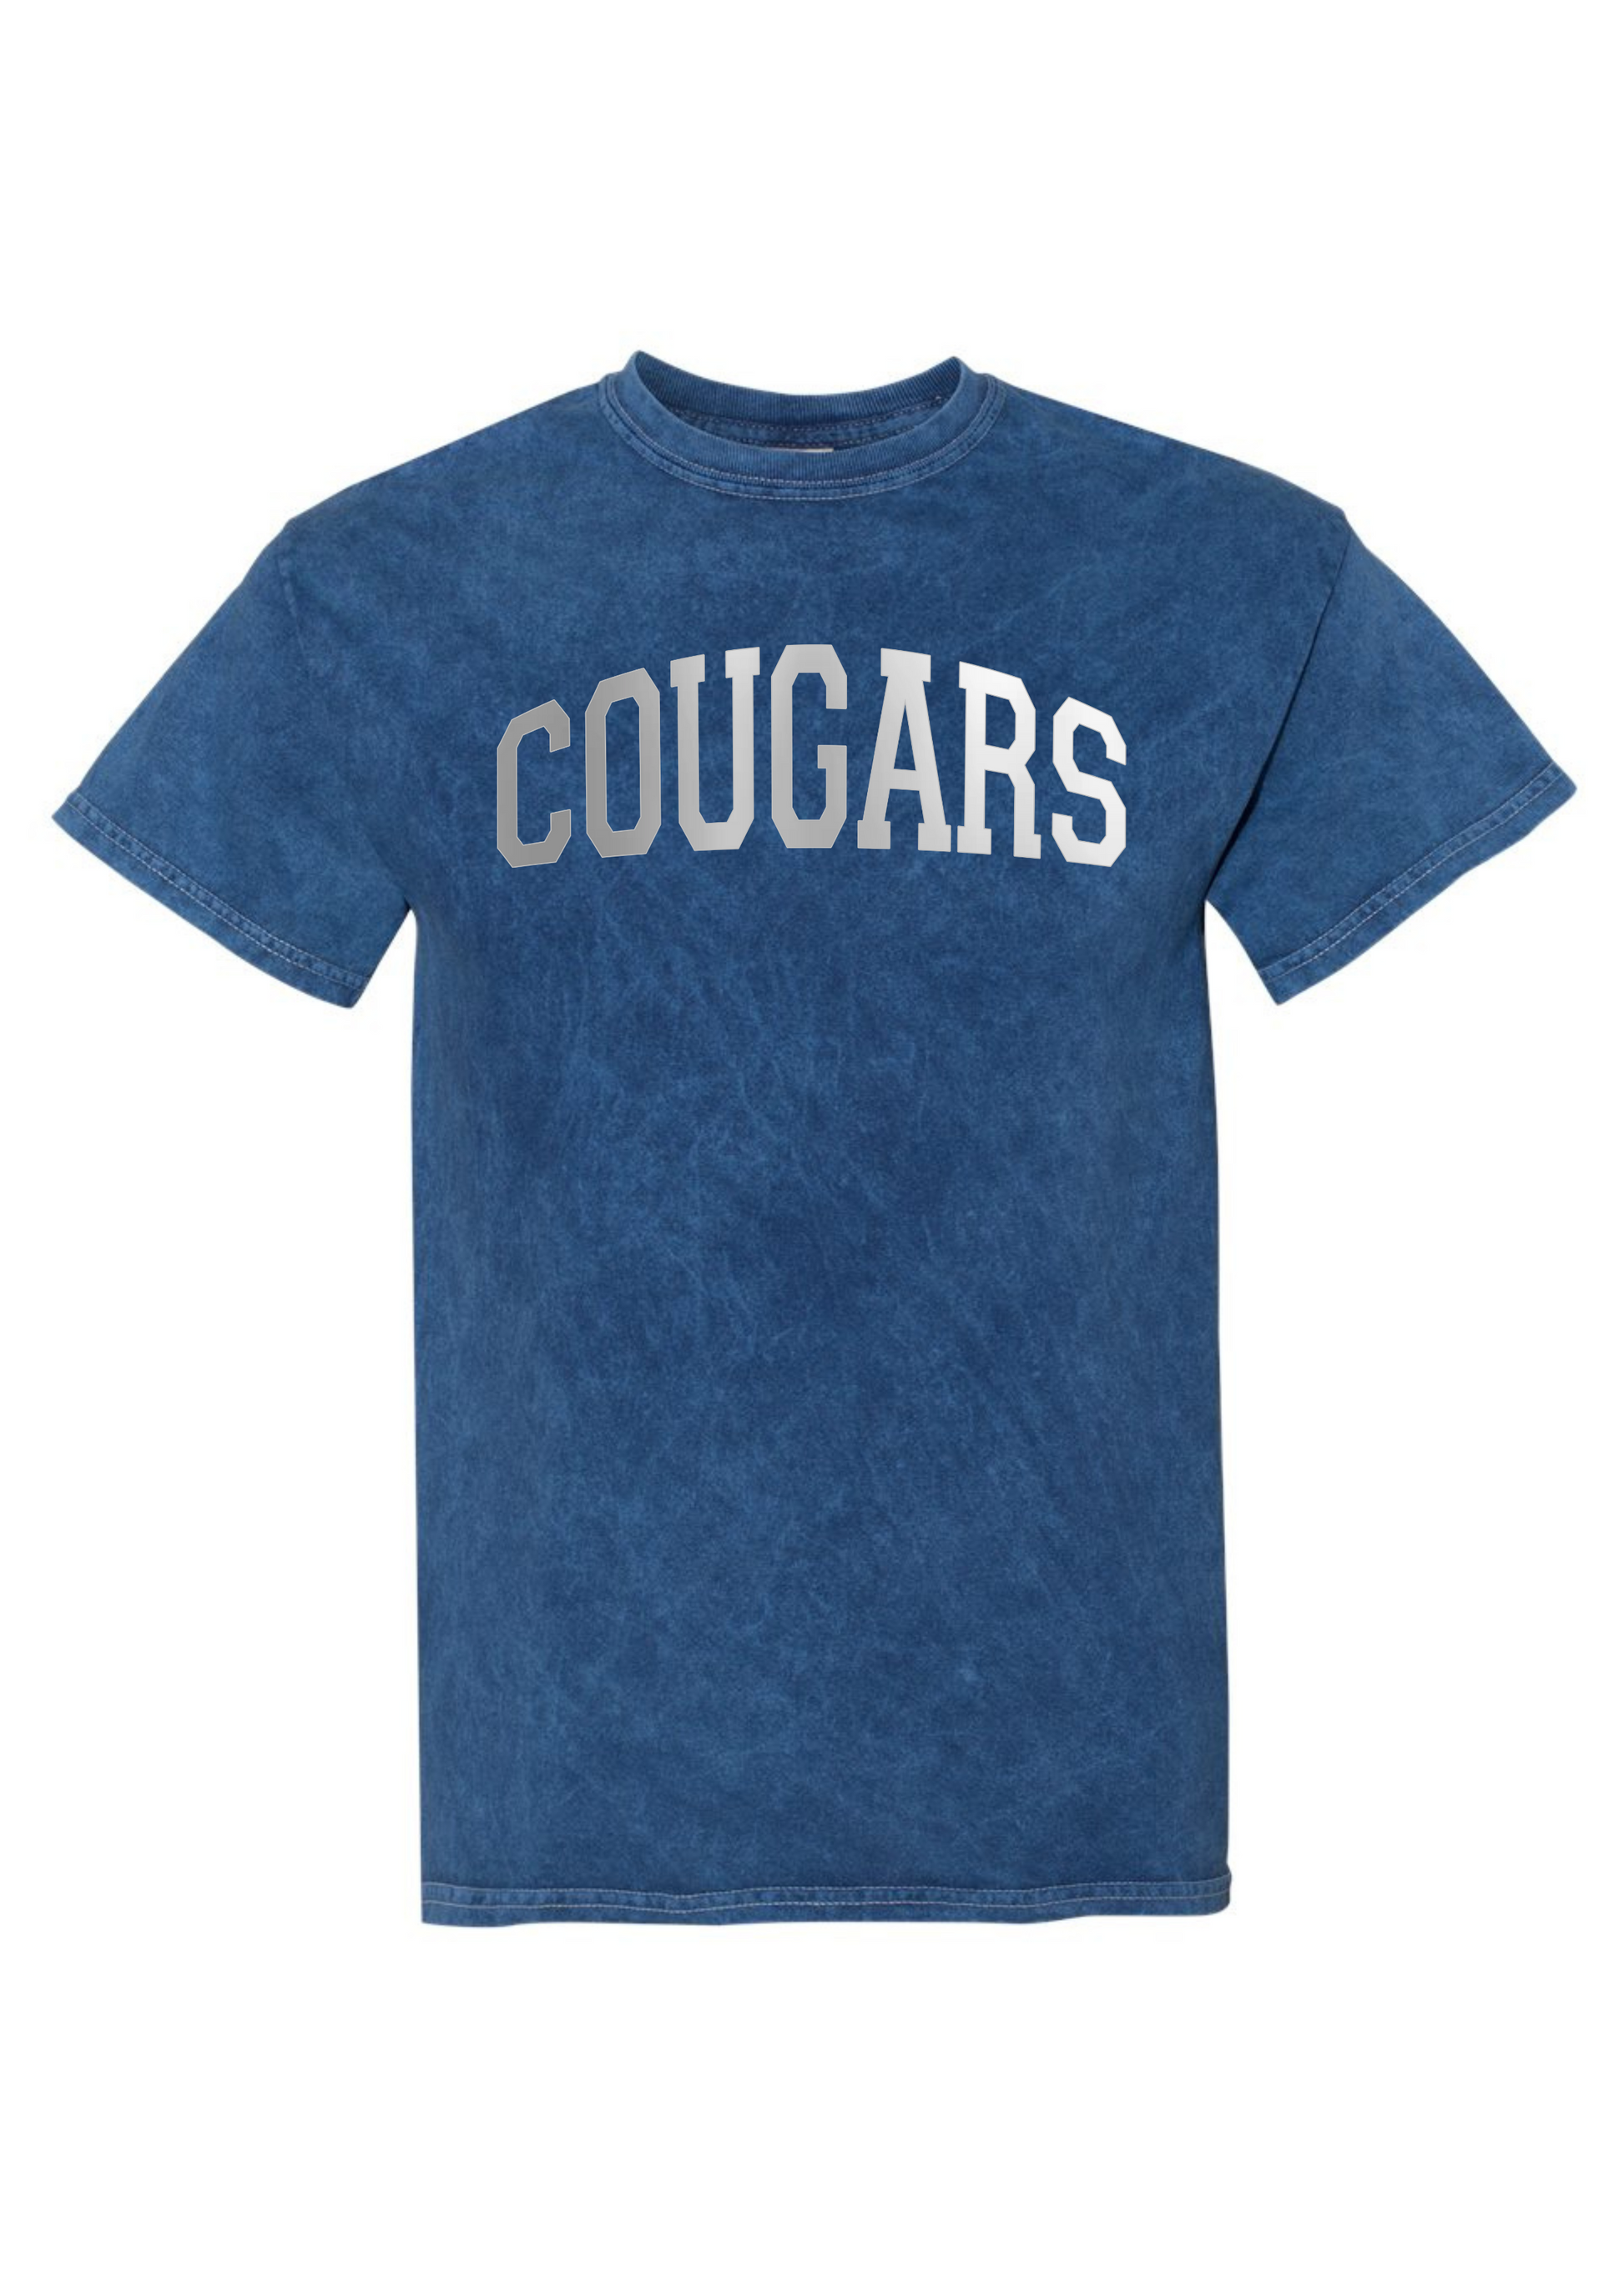 Cougars Foil | Adult Mineral Wash Tee-Adult Tee-Sister Shirts-Sister Shirts, Cute & Custom Tees for Mama & Littles in Trussville, Alabama.